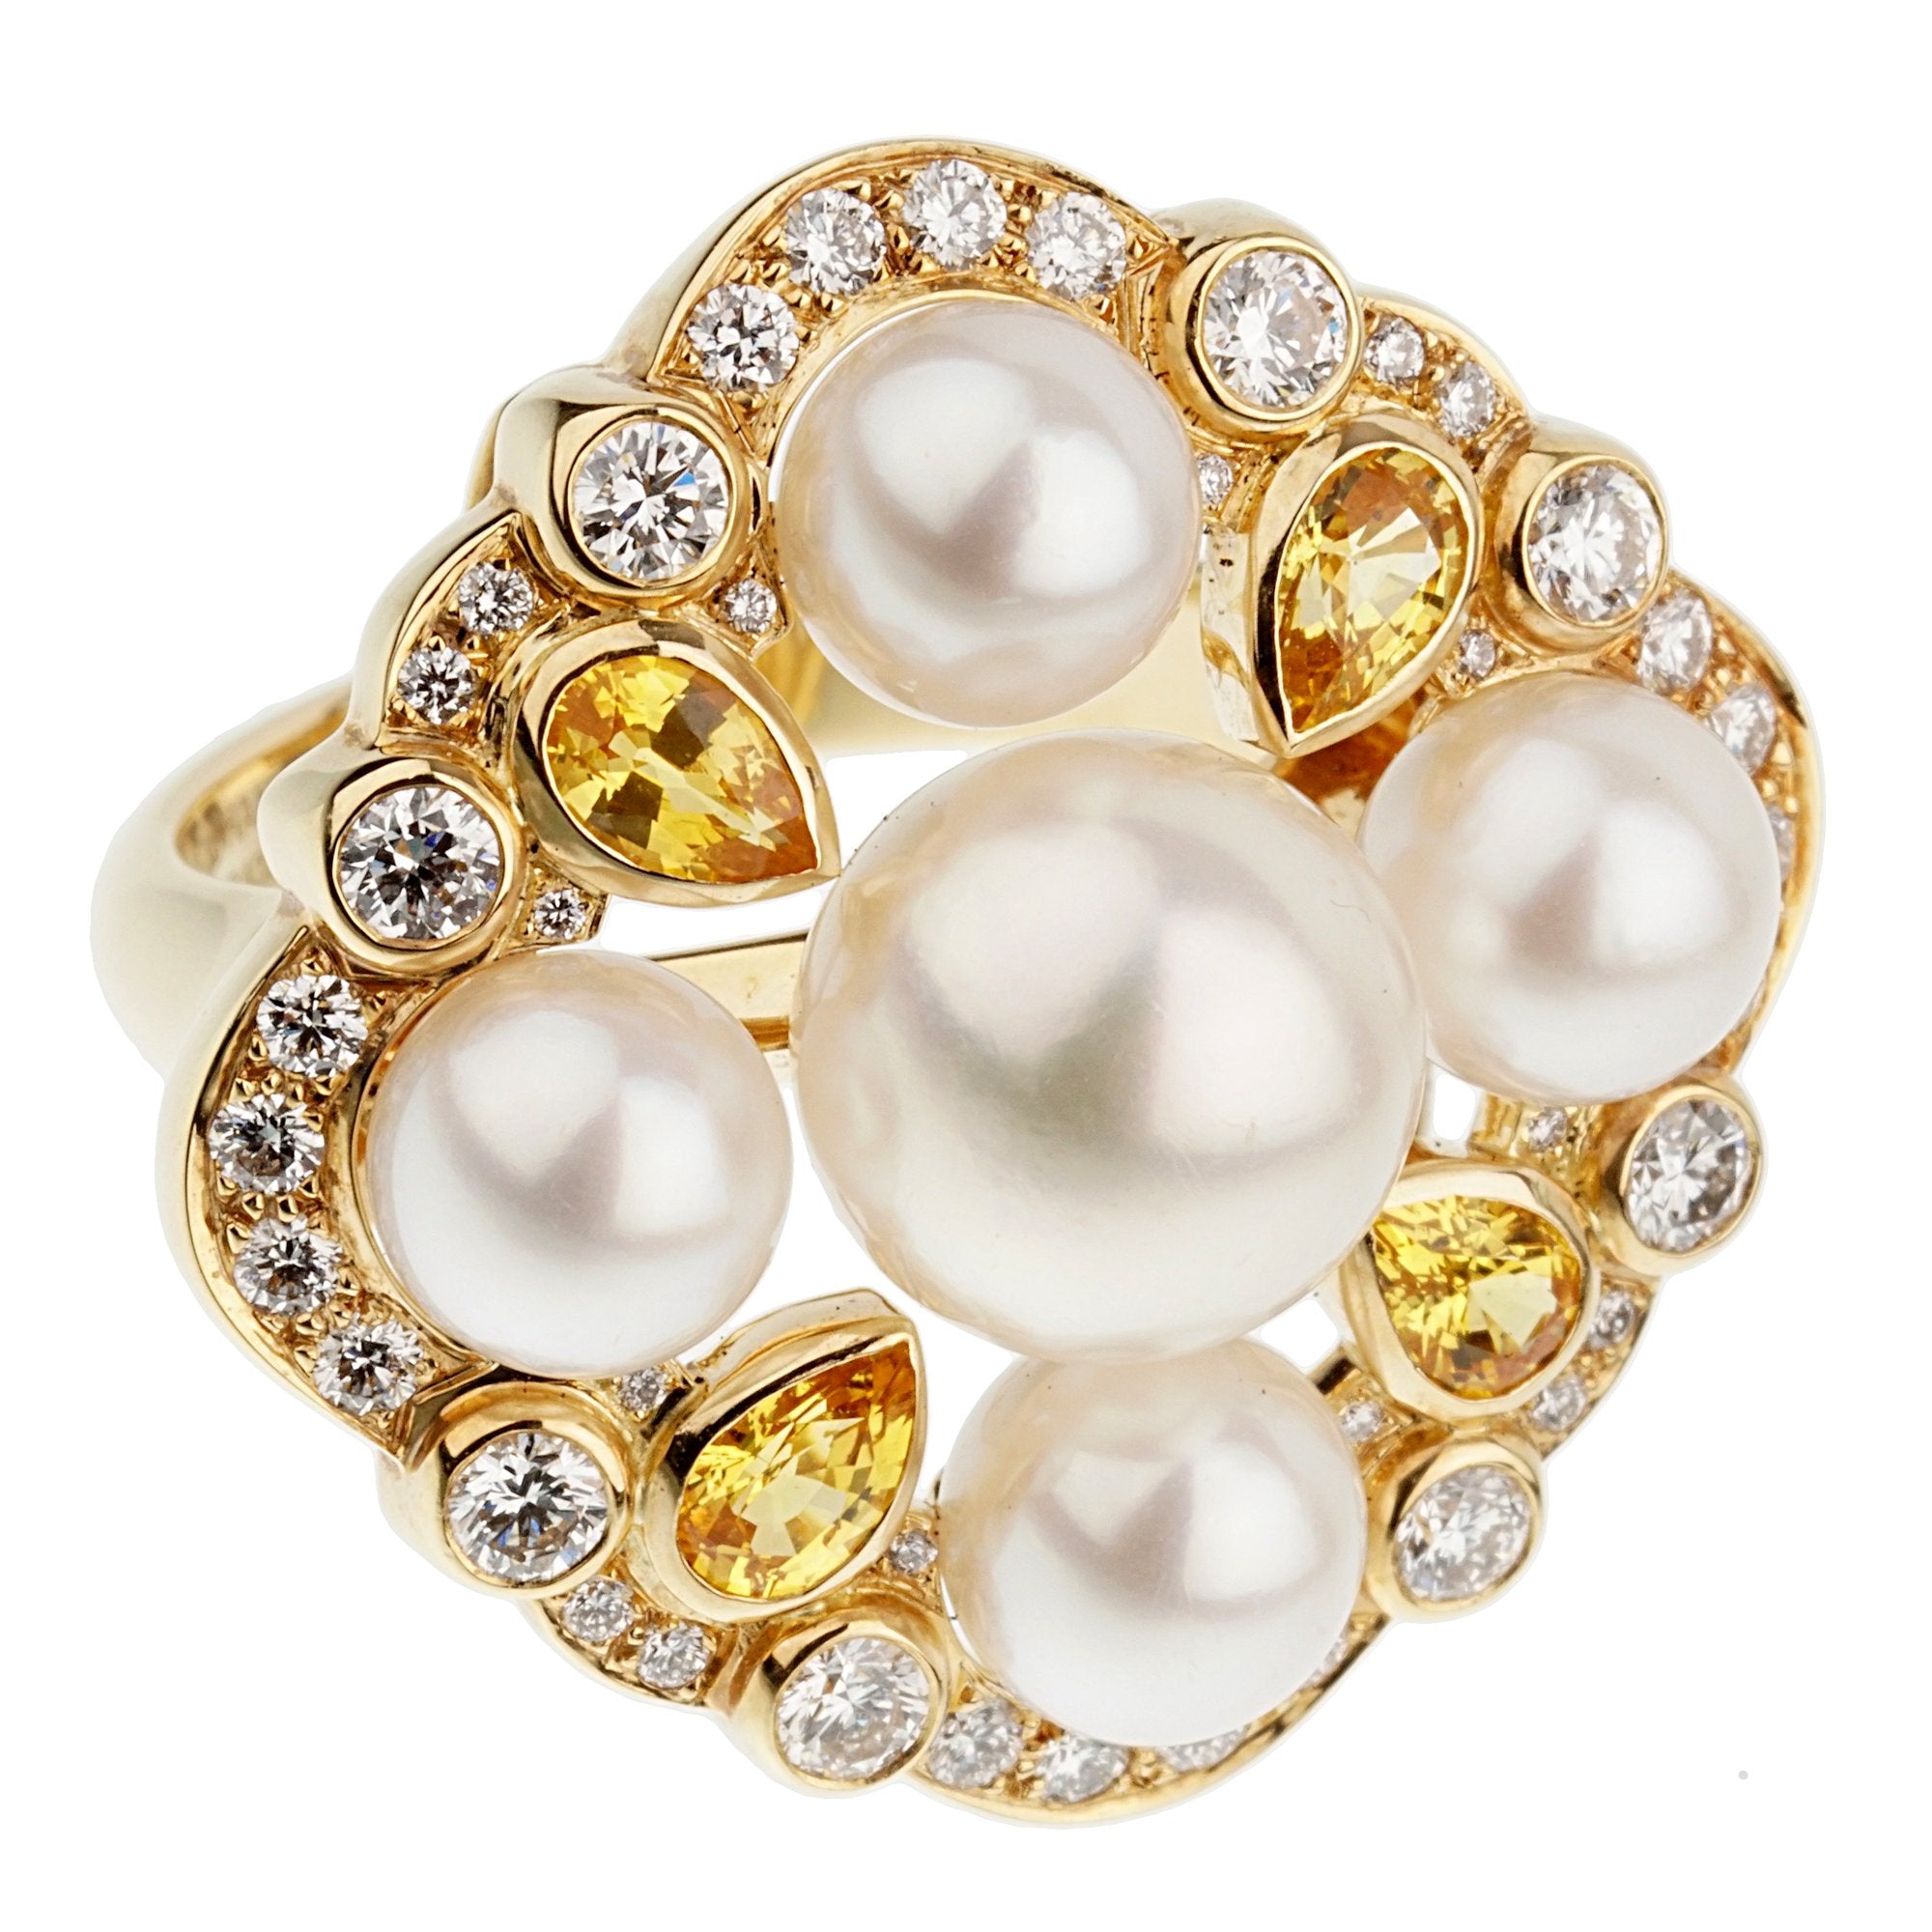 Louis Vuitton Monogram Pearl Cocktail Yellow Gold Ring – Opulent